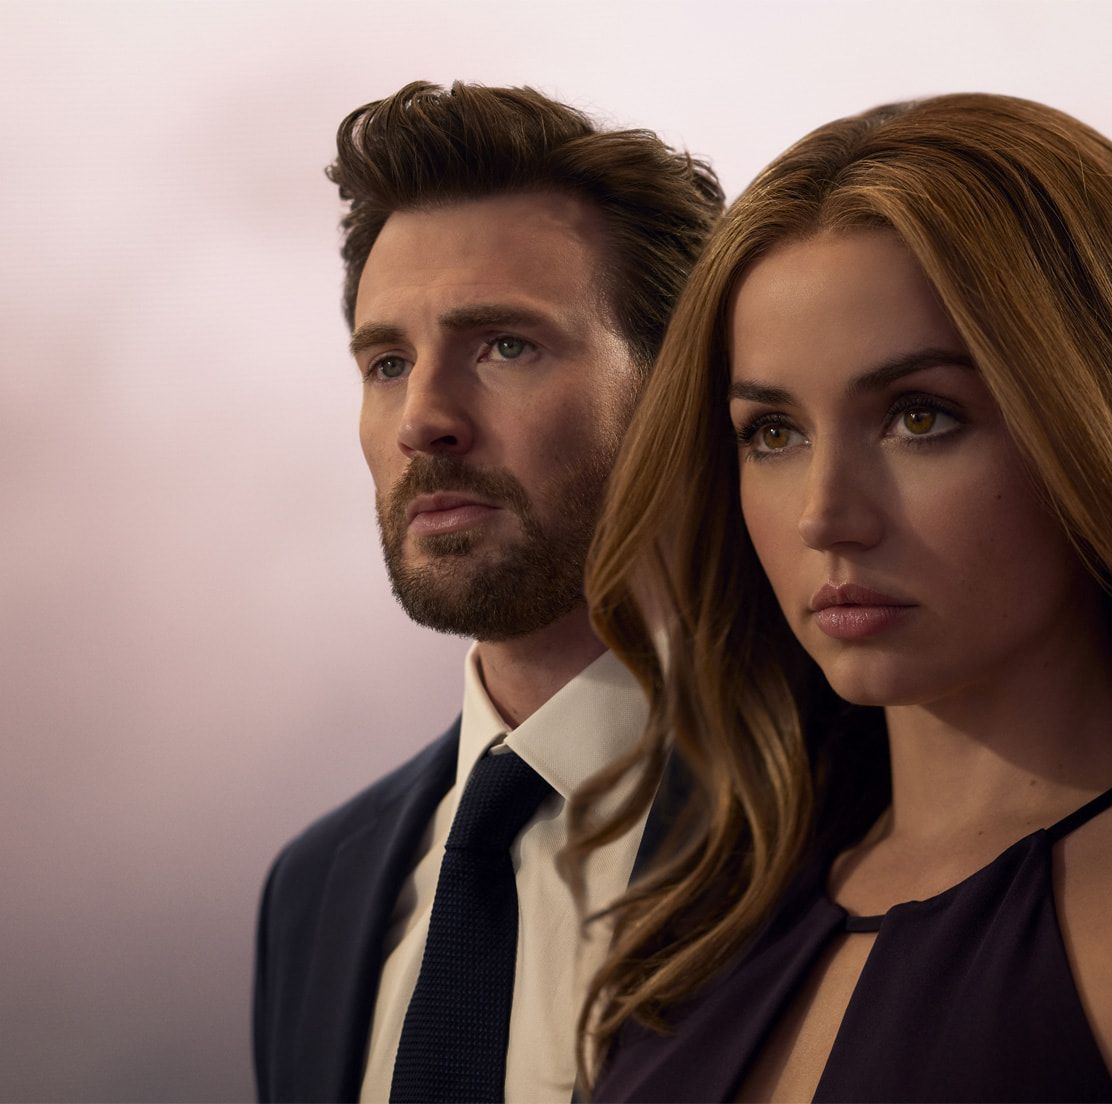 First Poster for Chris Evans & Ana de Armas' Ghosted Released by Apple TV